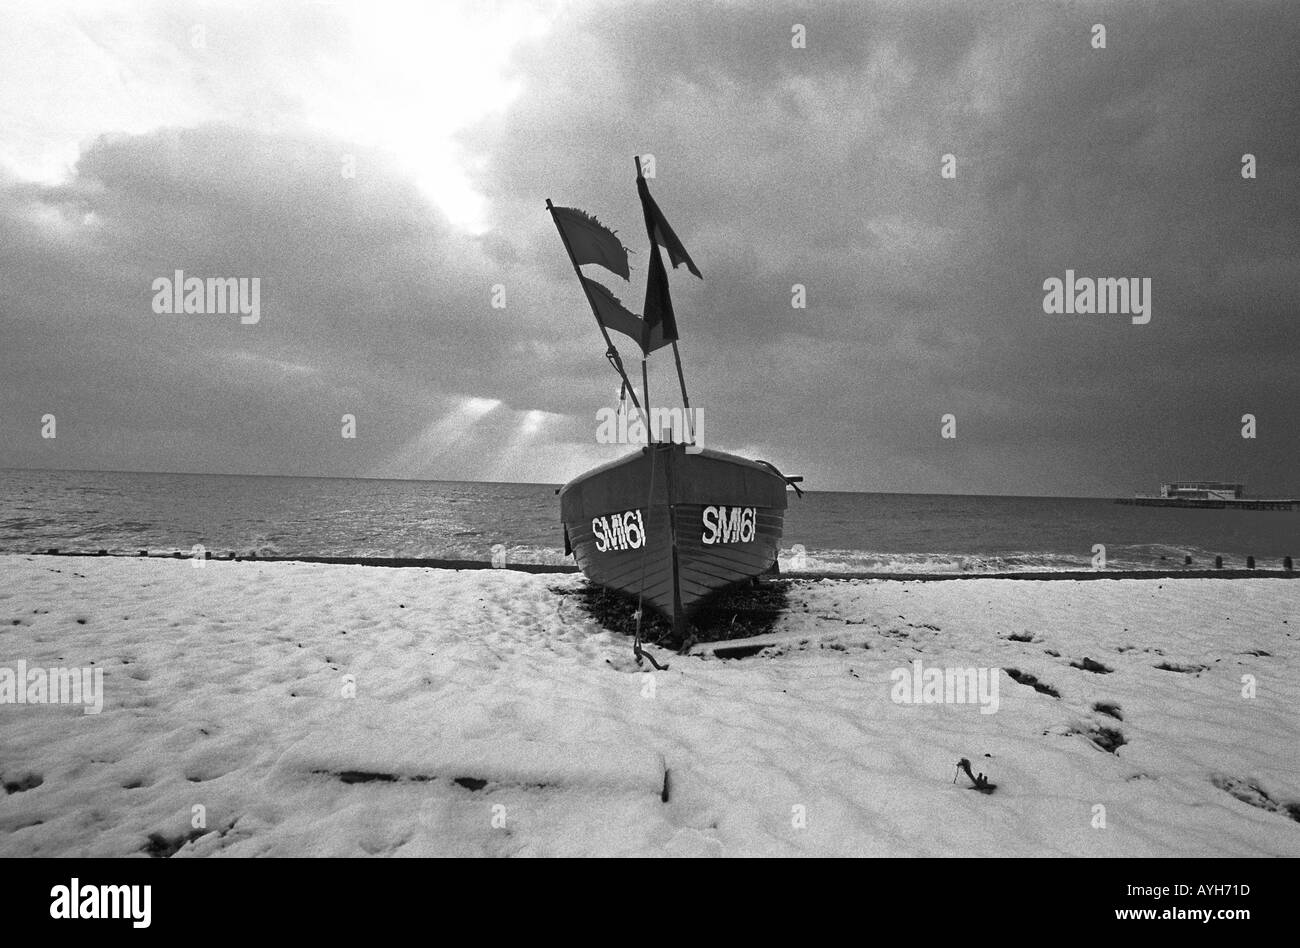 A fishing boat dusted with snow on Brighton beach Stock Photo